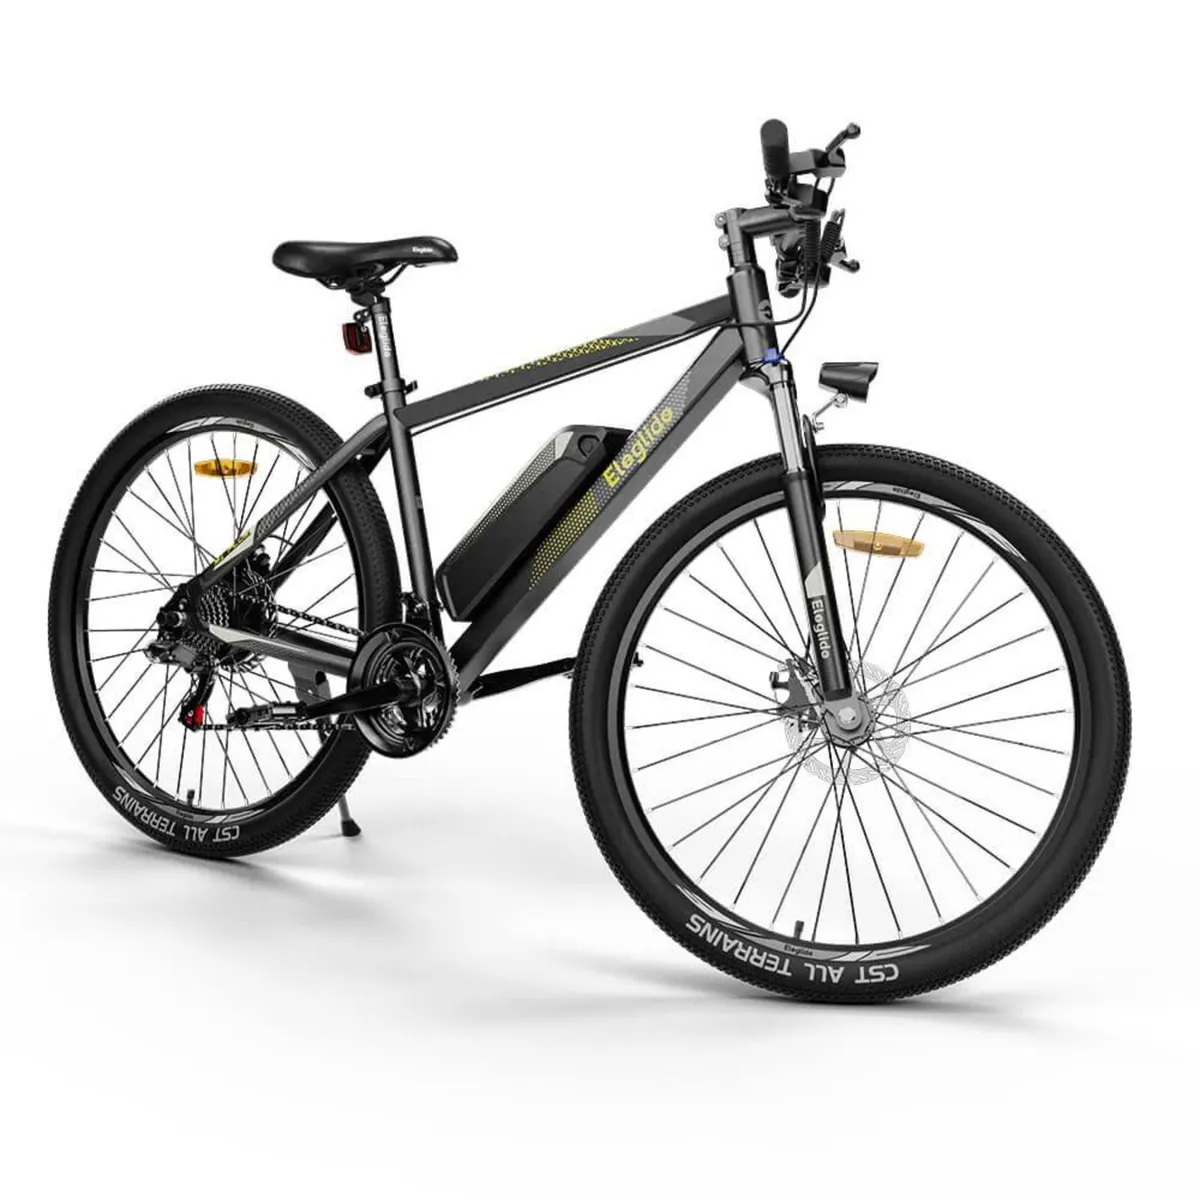 Free Delivery - New 29er Electric Mountain Bike